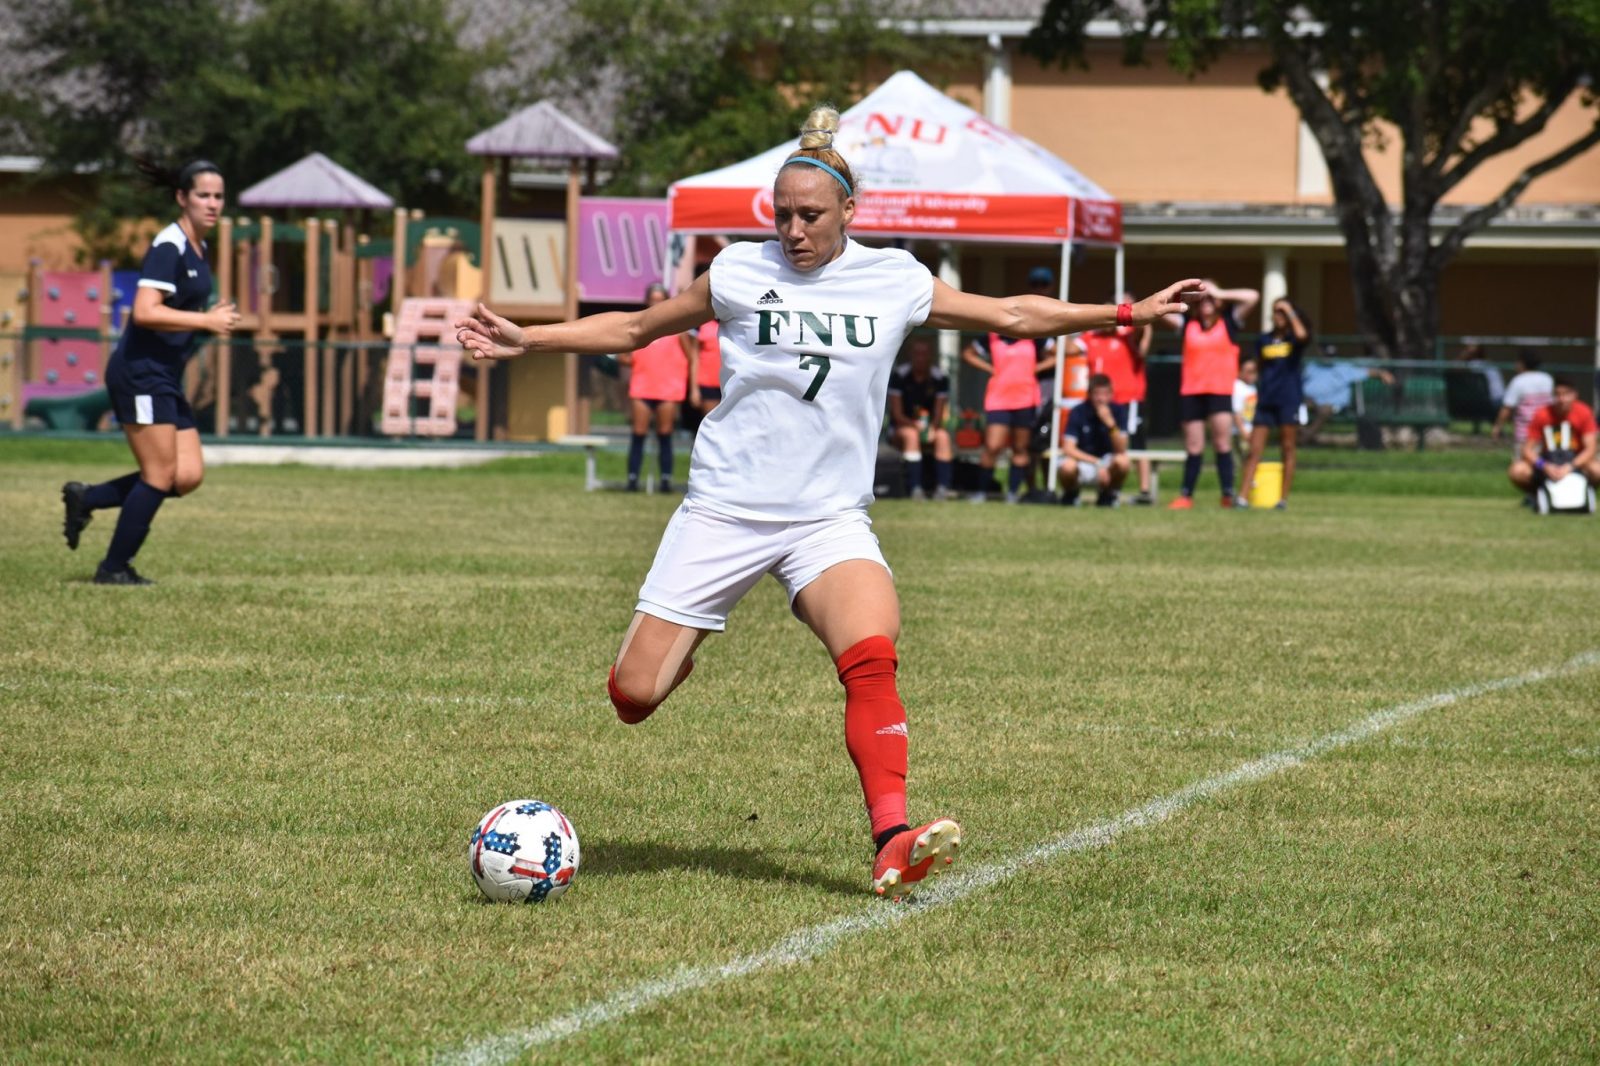 Fnu soccer player shooting the ball during the game against Warner University